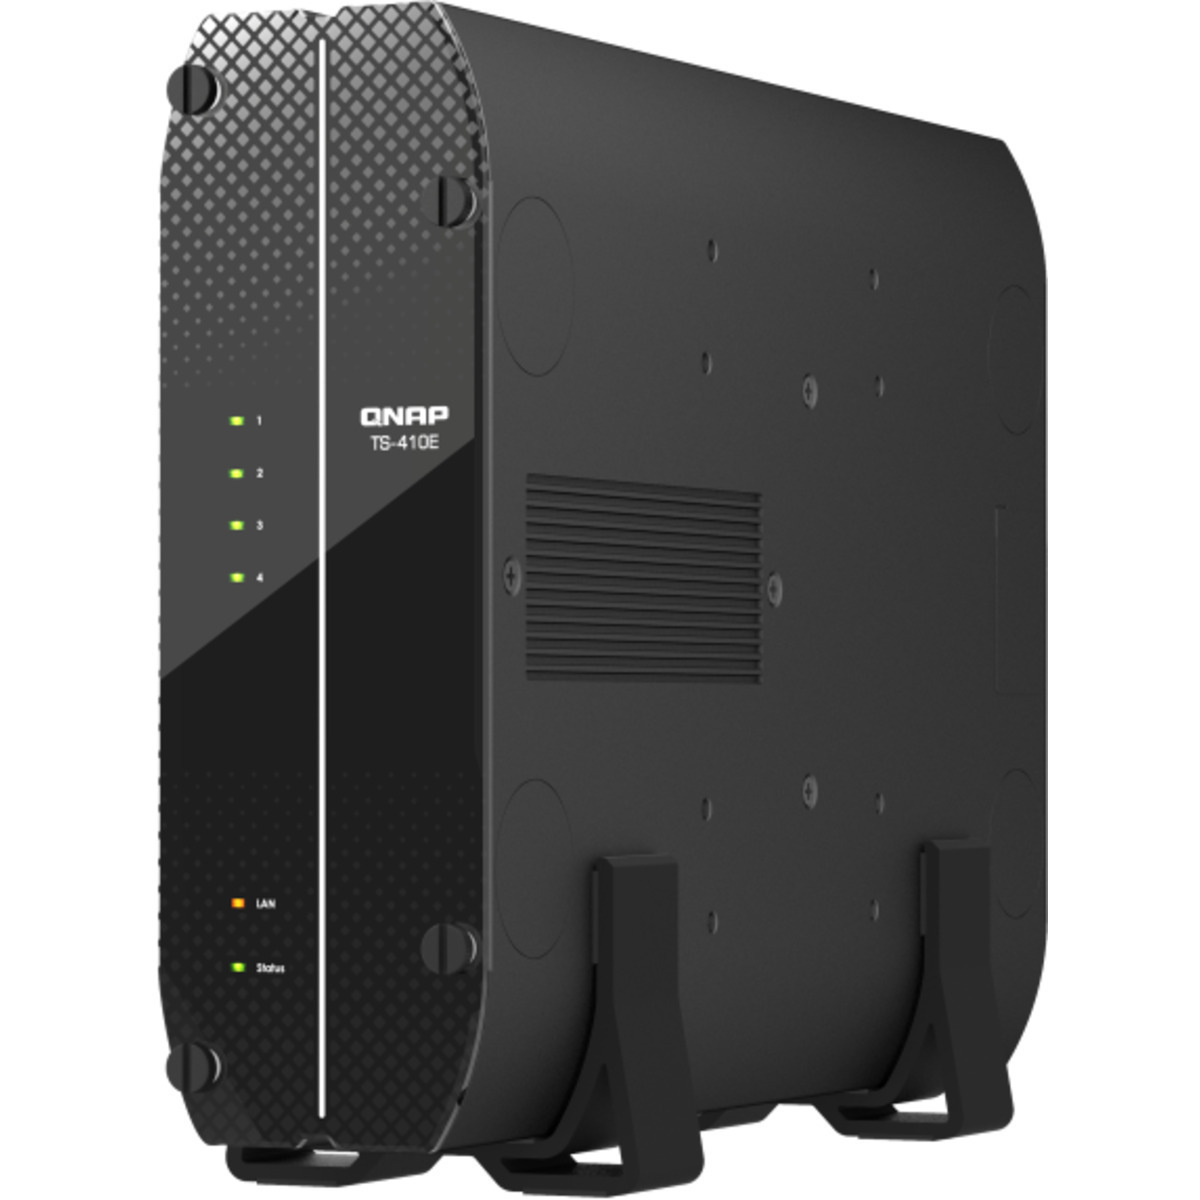 buy $2755 QNAP TS-410E 32tb Desktop NAS - Network Attached Storage Device 4x8000gb Samsung 870 QVO MZ-77Q8T0 2.5 560/530MB/s SATA 6Gb/s SSD CONSUMER Class Drives Installed - Burn-In Tested - ON SALE - nas headquarters buy network attached storage server device das new raid-5 free shipping simply usa TS-410E